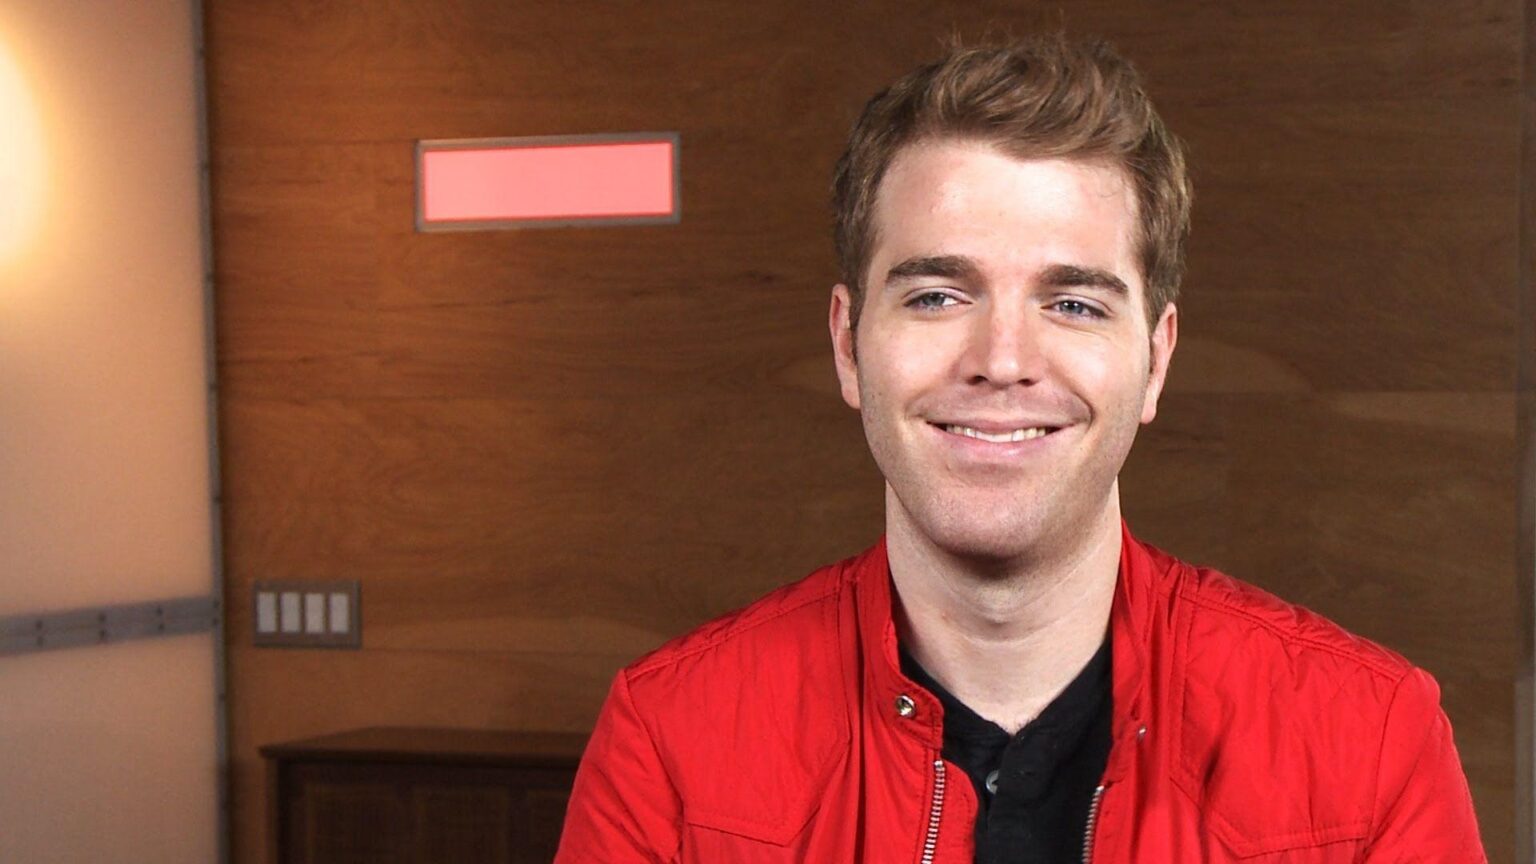 Shane Dawson has hinted that he may be making a comeback, but does this mean Twitter users have forgotten about his problematic past? Find out here.